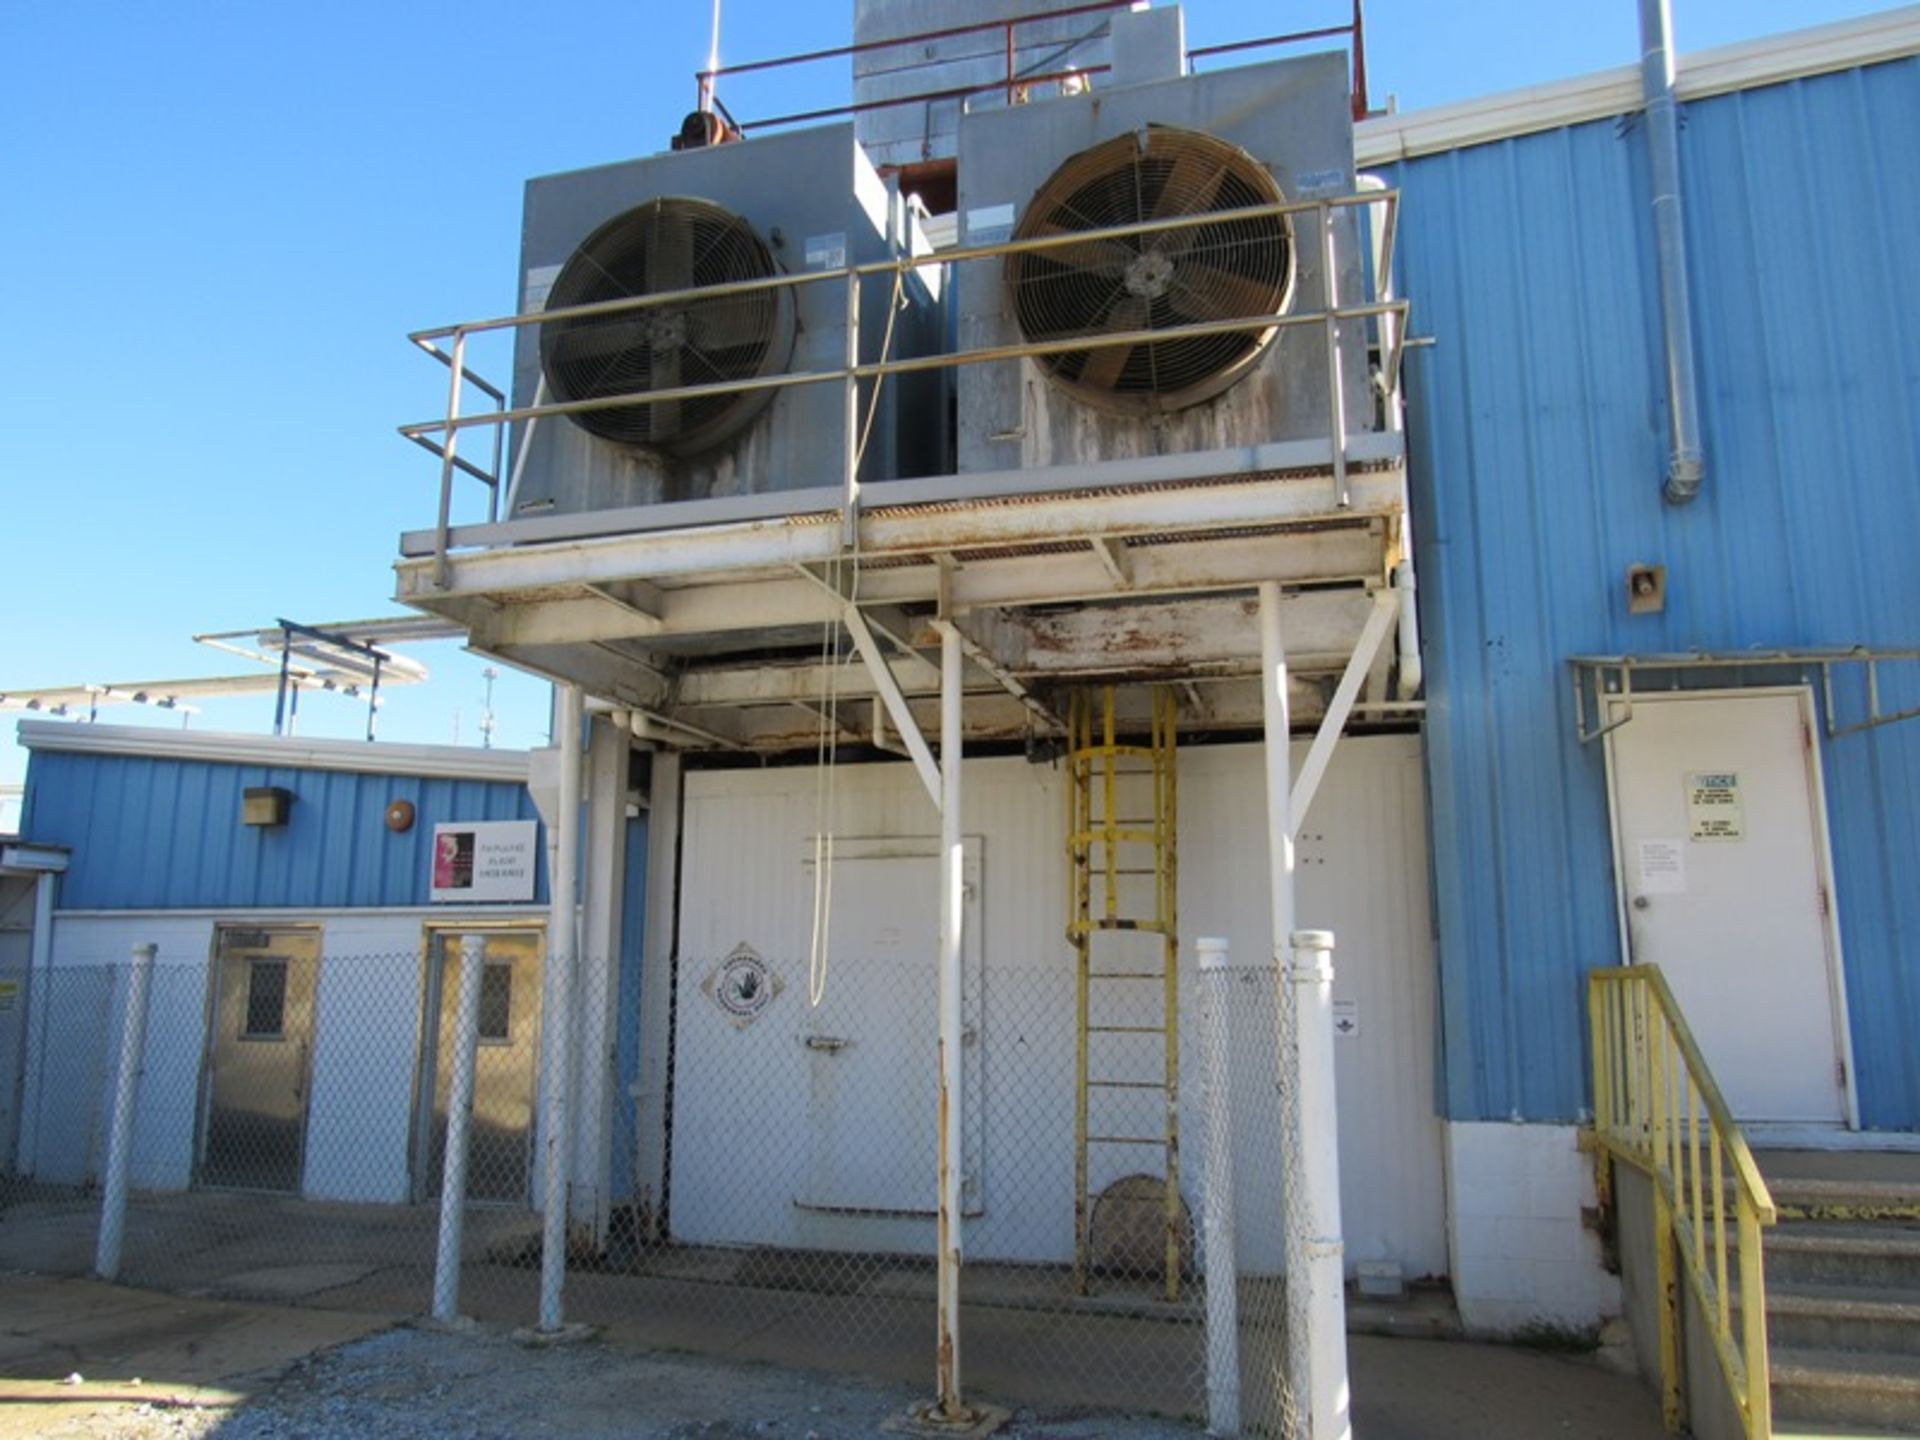 Lot (2) Marley Single Fan Condensers on shared platform, 12' W X 15' L X 12' T with ladder, 48" Dia.